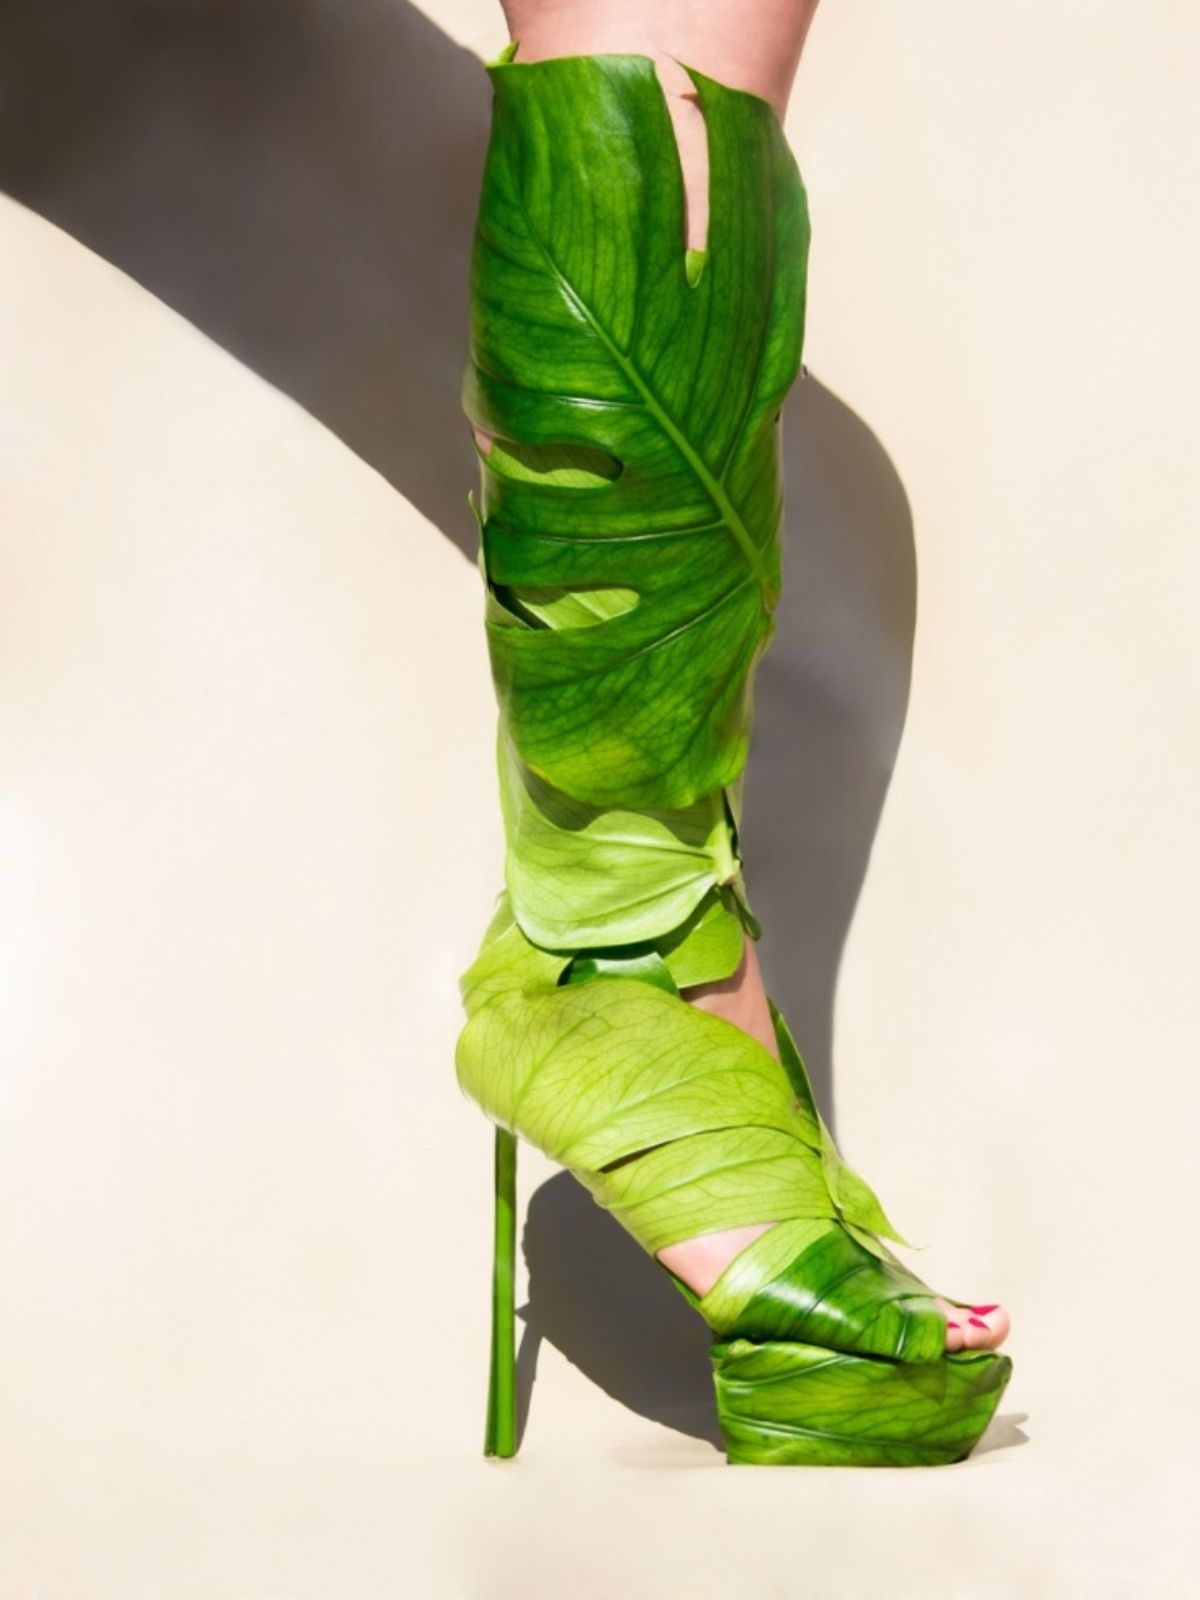 Make a Fashion Statement With These Unique Green Slippers - monstera shoes - Pantoufle de Vert article on thursd